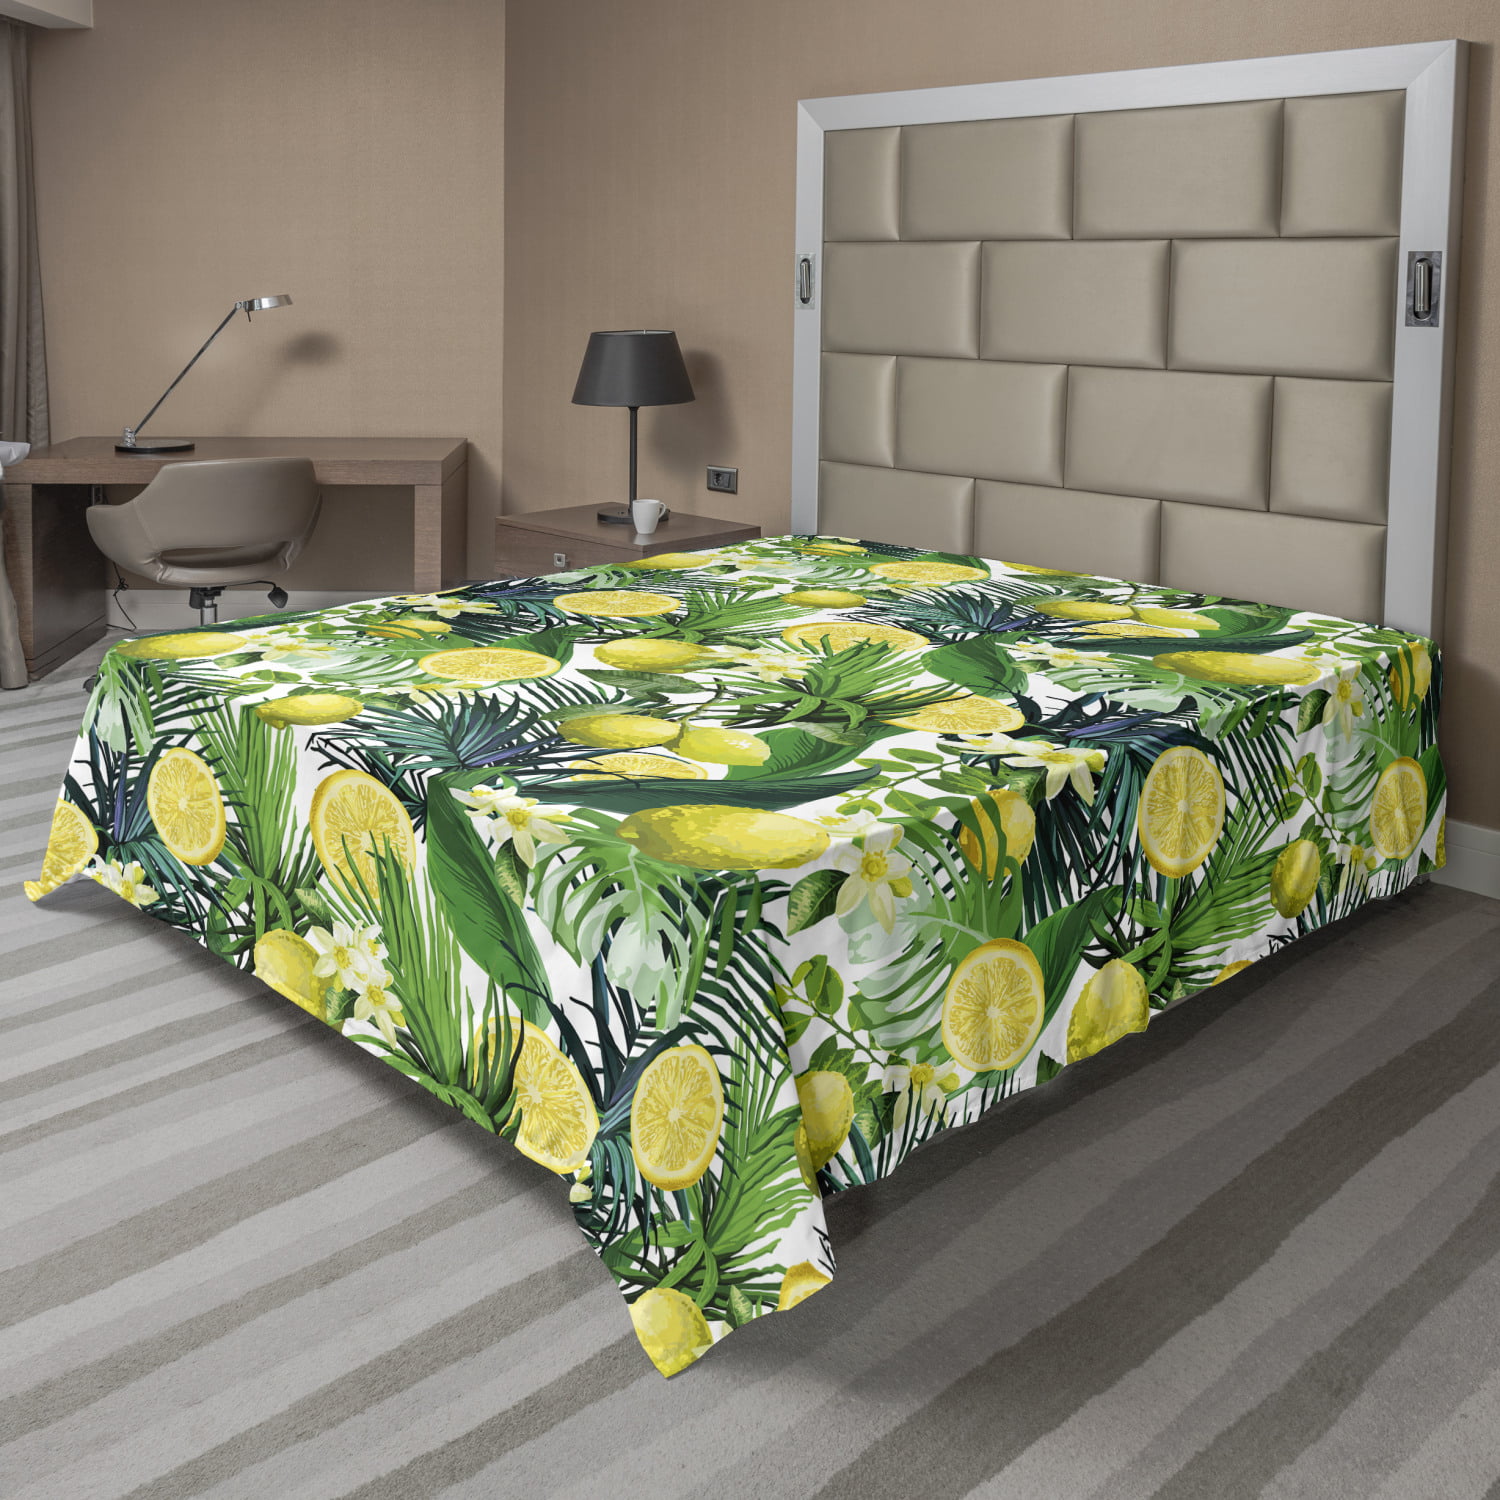 semester Tirannie Verfijning Nature Flat Sheet, Tropical Plants with Large Evergreen Leaf Lemon Botany  Palm Jungle Graphic, Soft Comfortable Top Sheet Decorative Bedding 1 Piece,  6 Sizes, Yellow Forest Green, by Ambesonne - Walmart.com